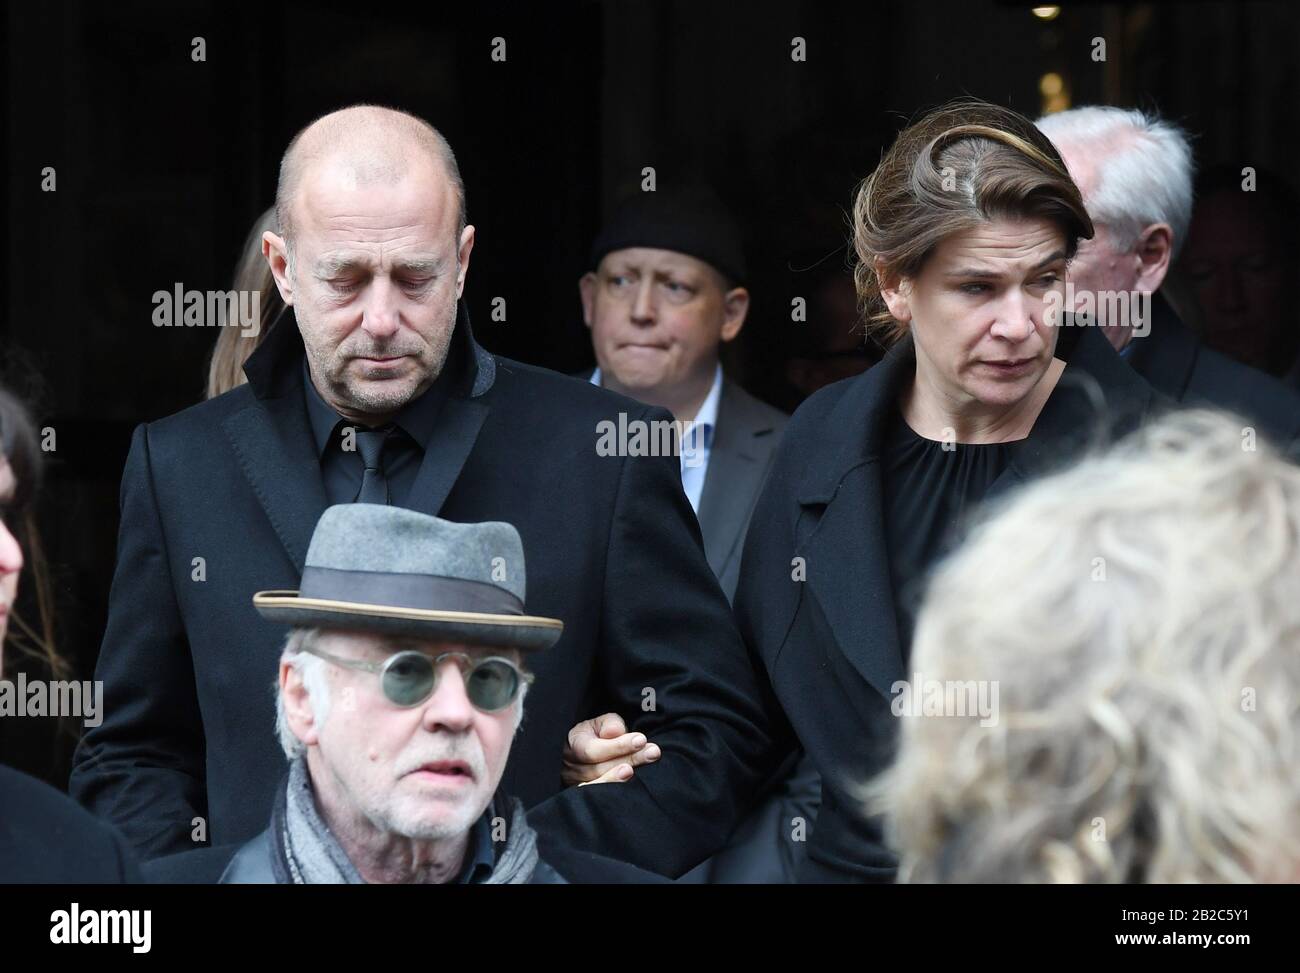 Munich, Germany. 02nd Mar, 2020. Heino Ferch, actor, and his wife Marie-Jeanette Ferch leave the church after the funeral service for director and cameraman Joseph Vilsmaier. Vilsmaier had died on 11 February at the age of 81. Credit: Tobias Hase/dpa/Alamy Live News Stock Photo